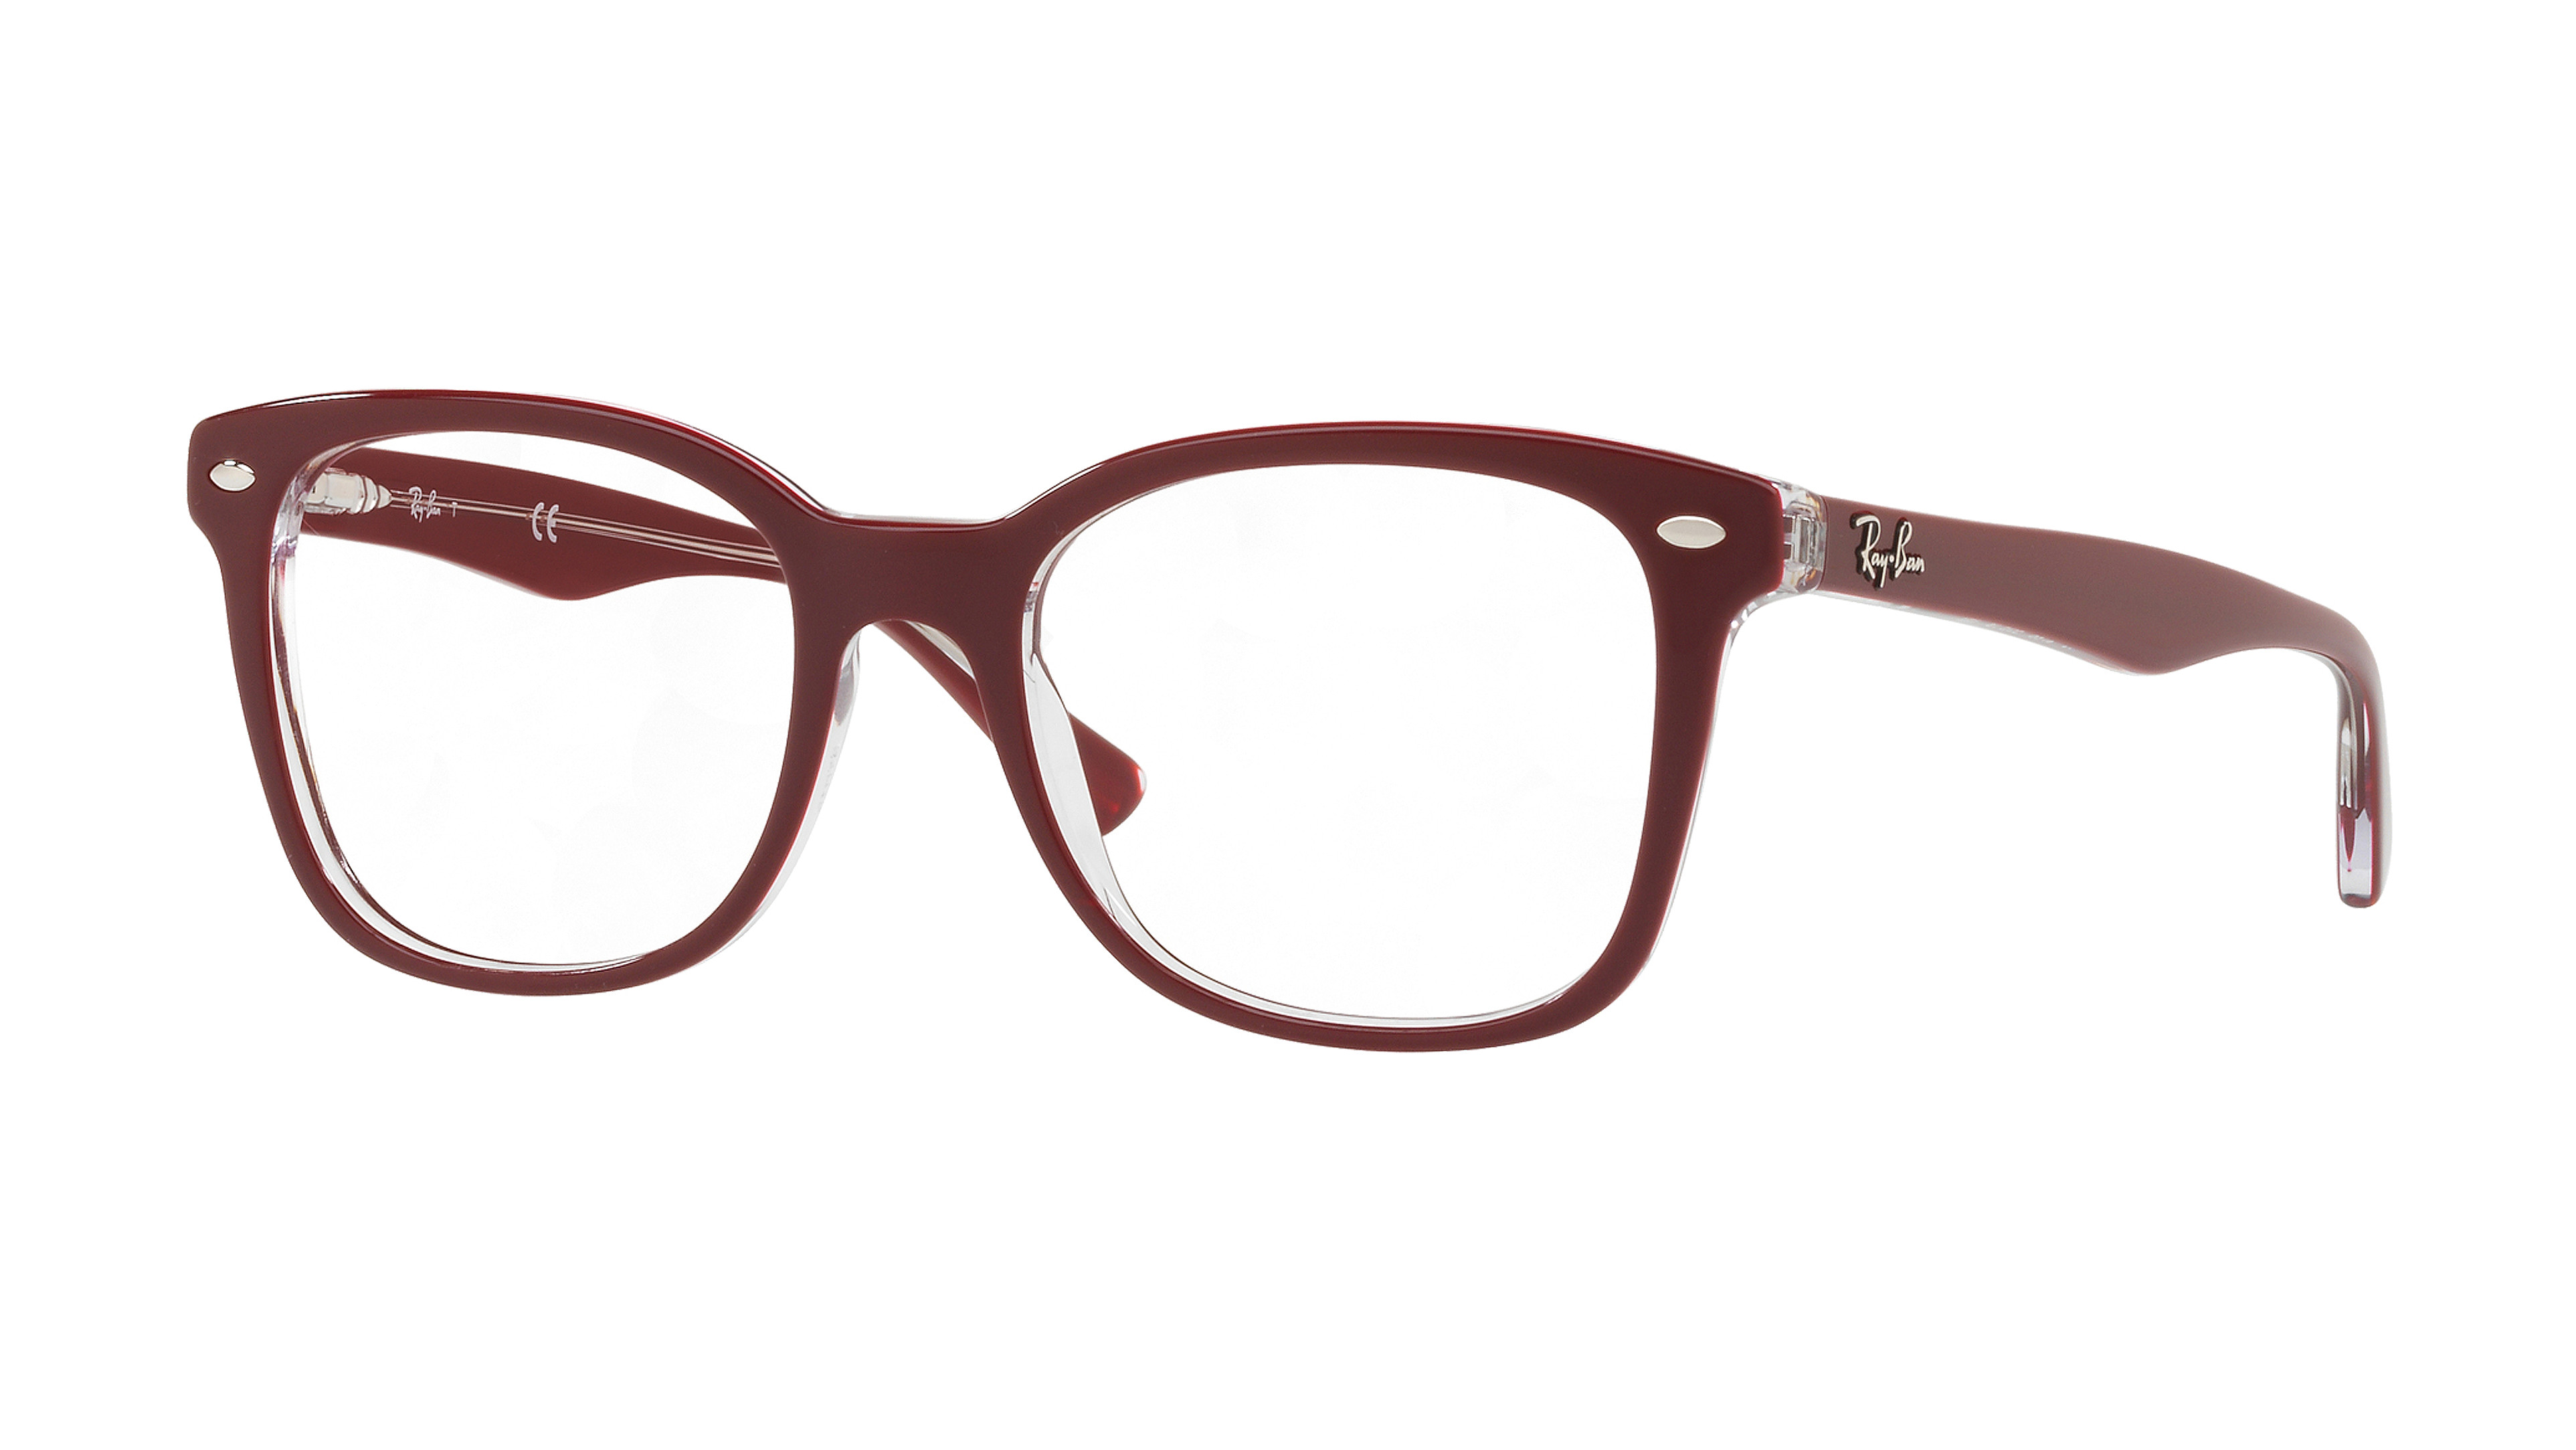 Angle_Left01 Ray-Ban OPTICS 0RX5285 5738 Brille Rot, Transparent